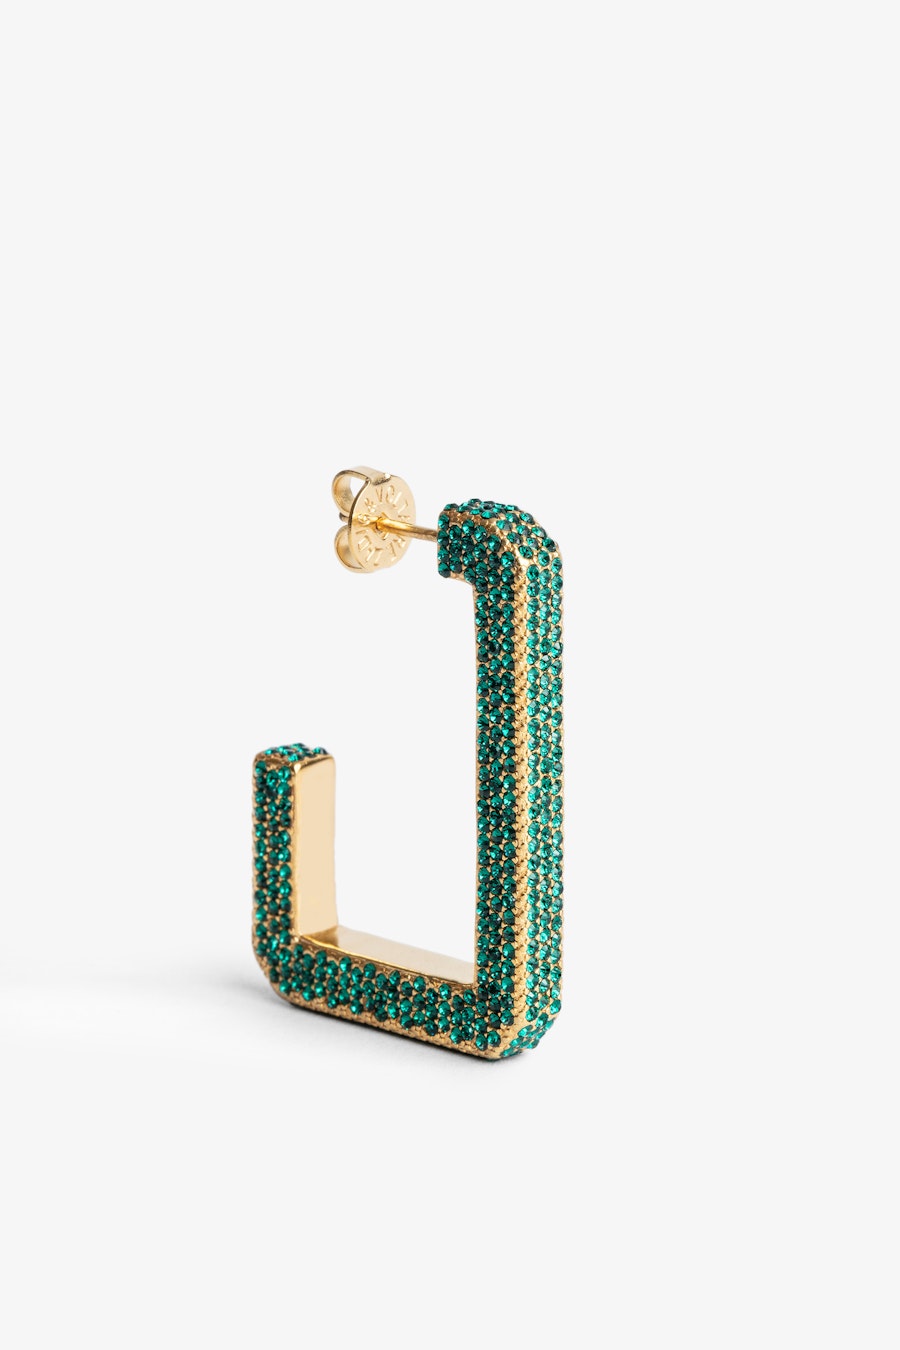 ZADIG&VOLTAIRE Cecilia Strass Earrings